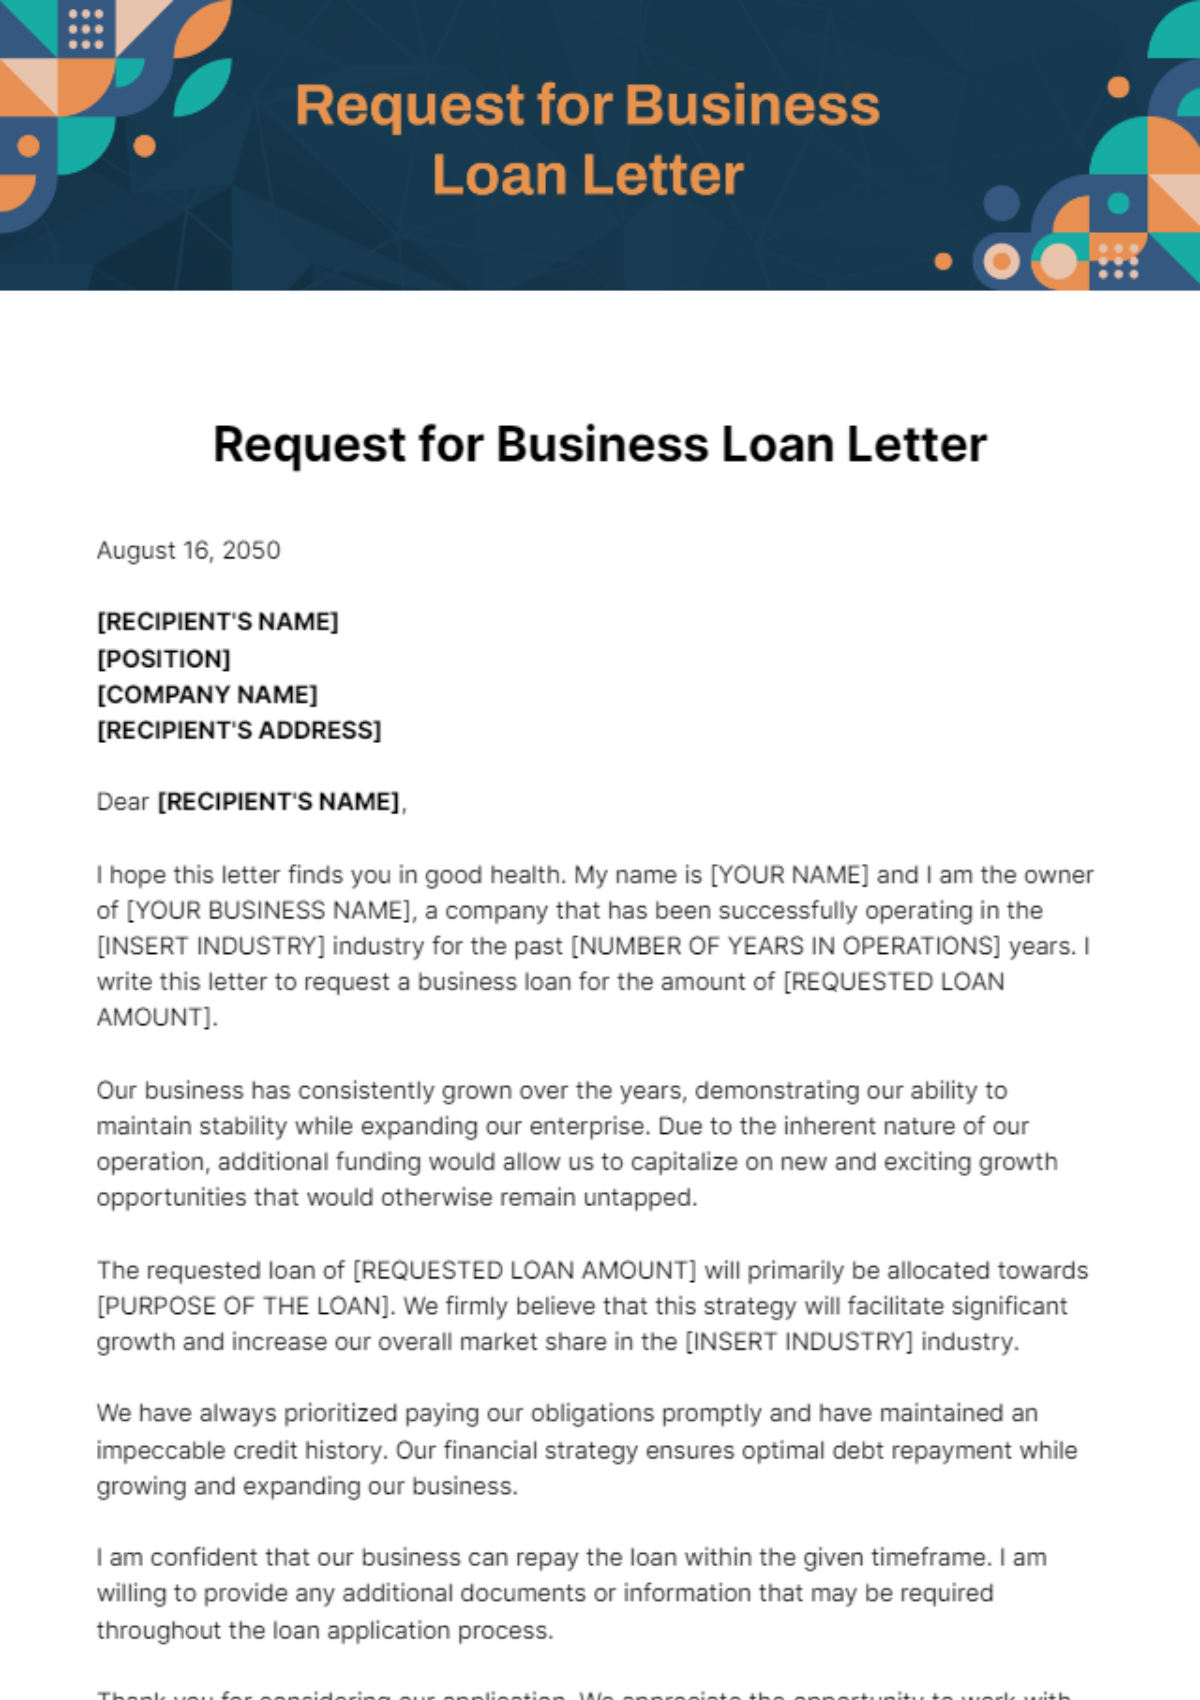 Free Request for Business Loan Letter Template